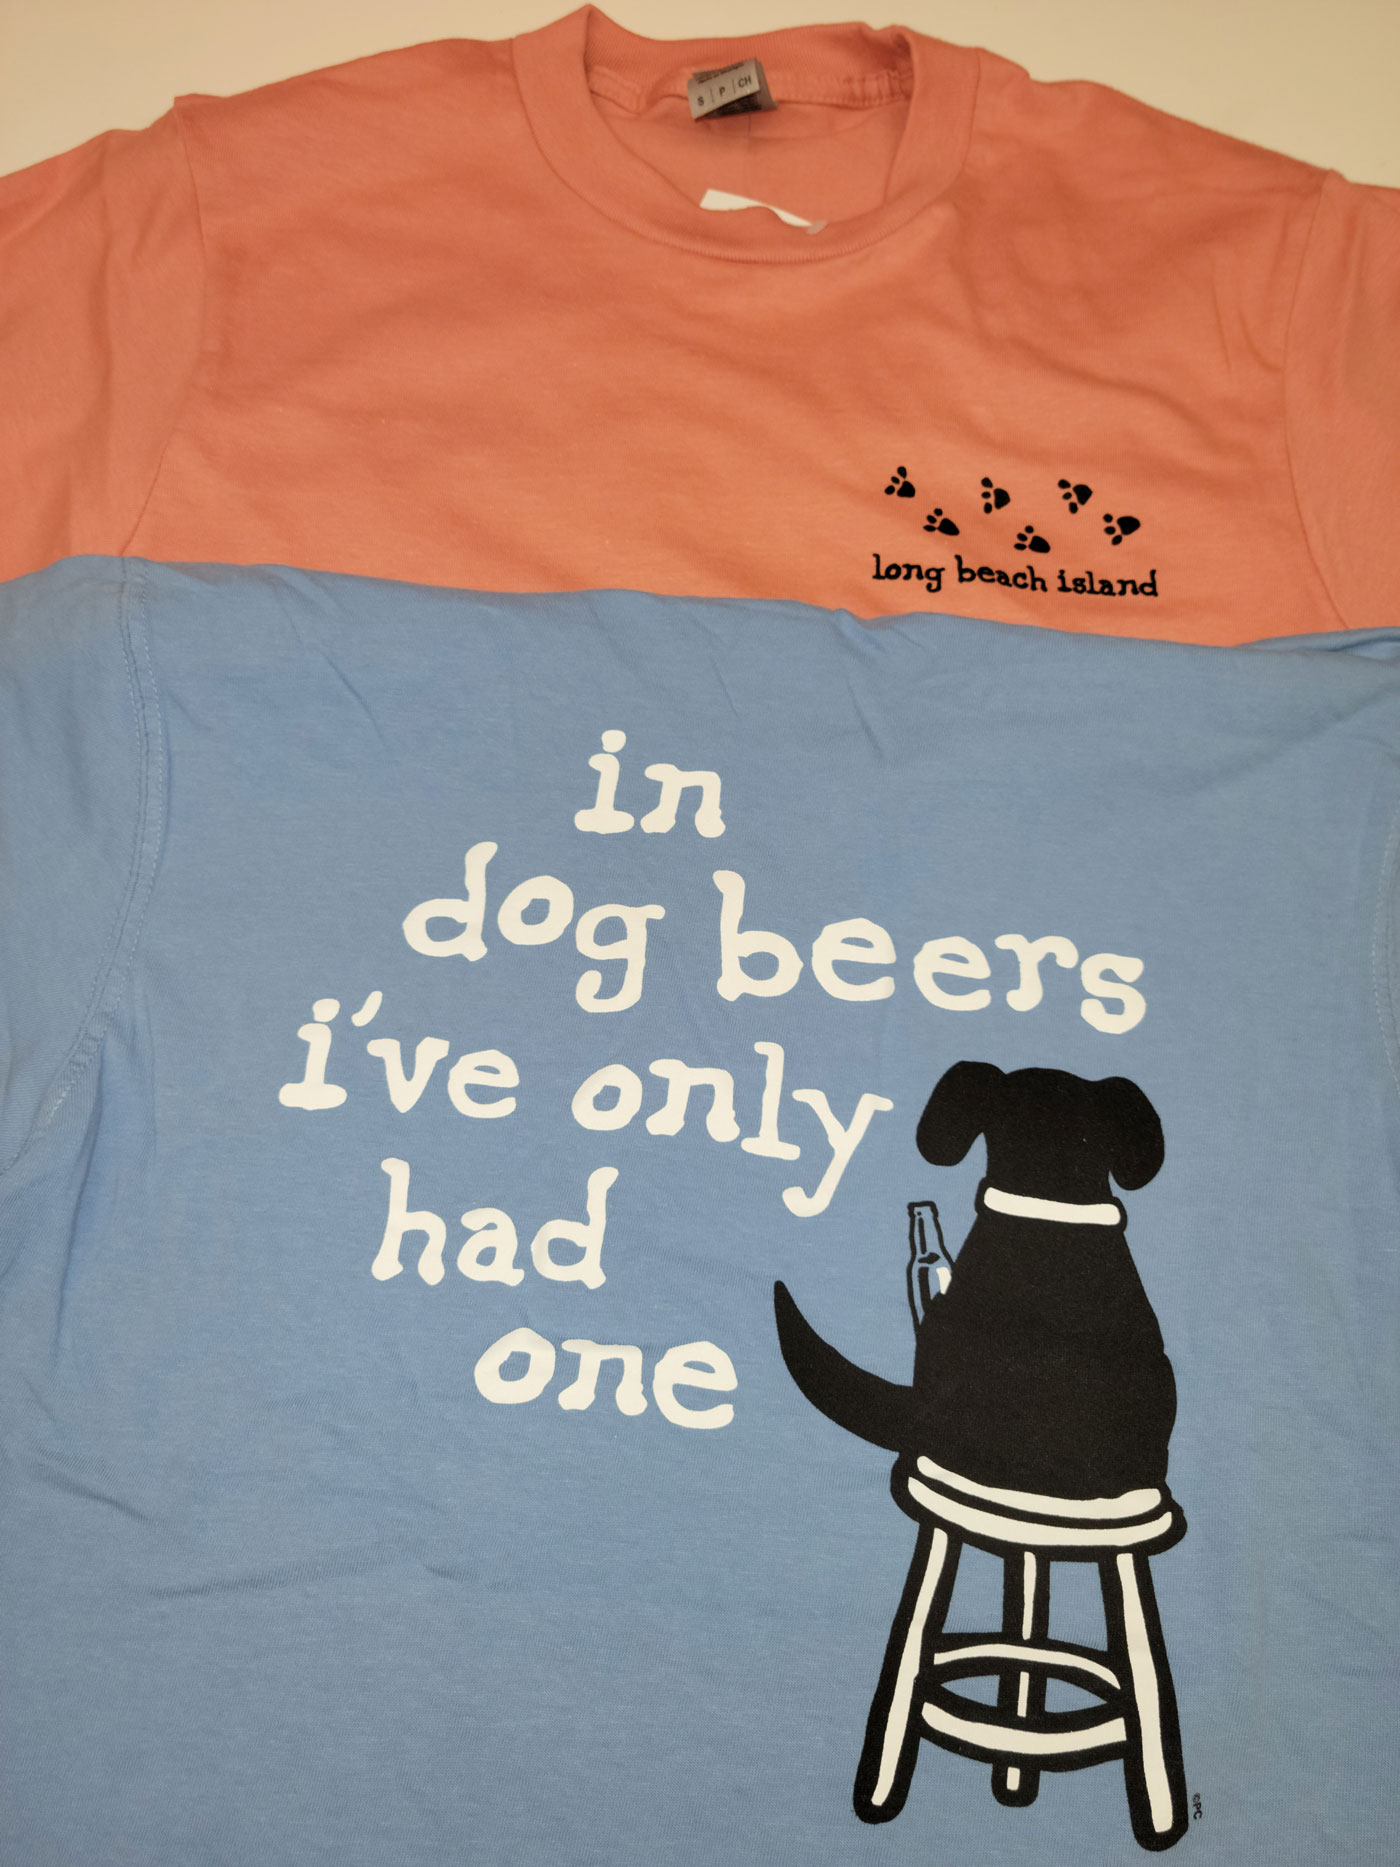 T-Shirt - In Dog Beers I've Only Had One - PG&J Dog Park Bar